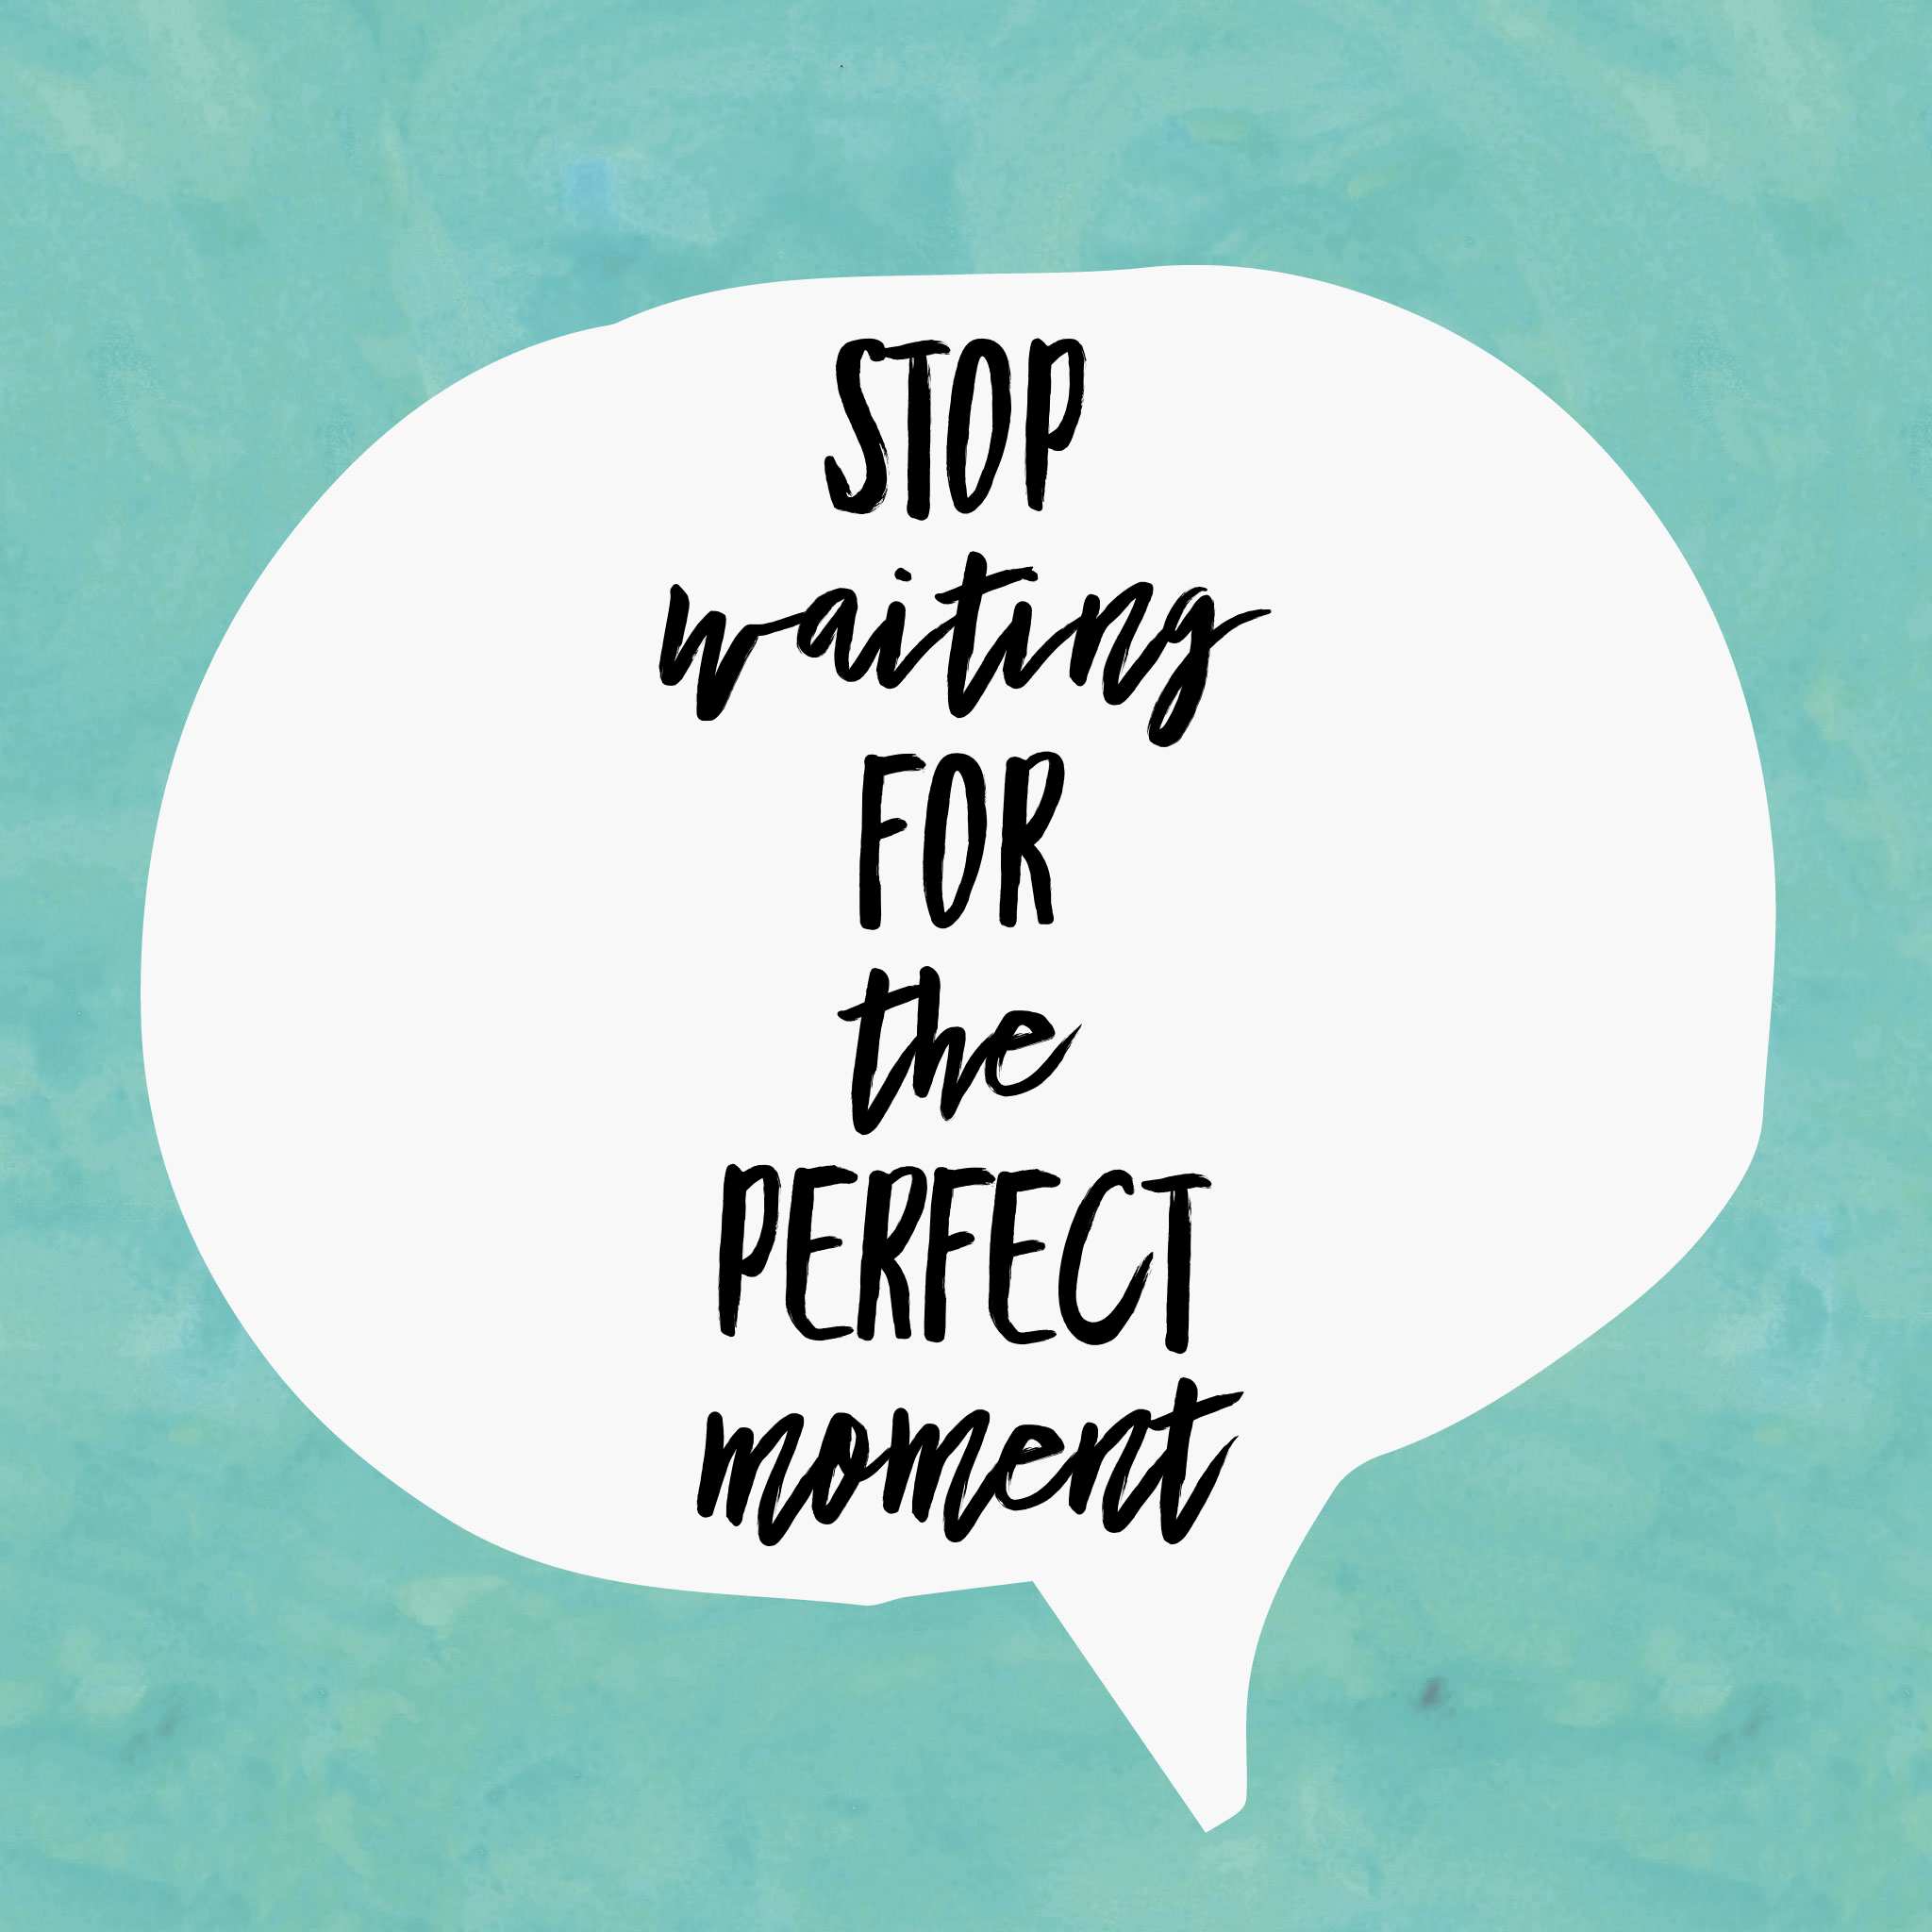 Stop waiting for the perfect moment…